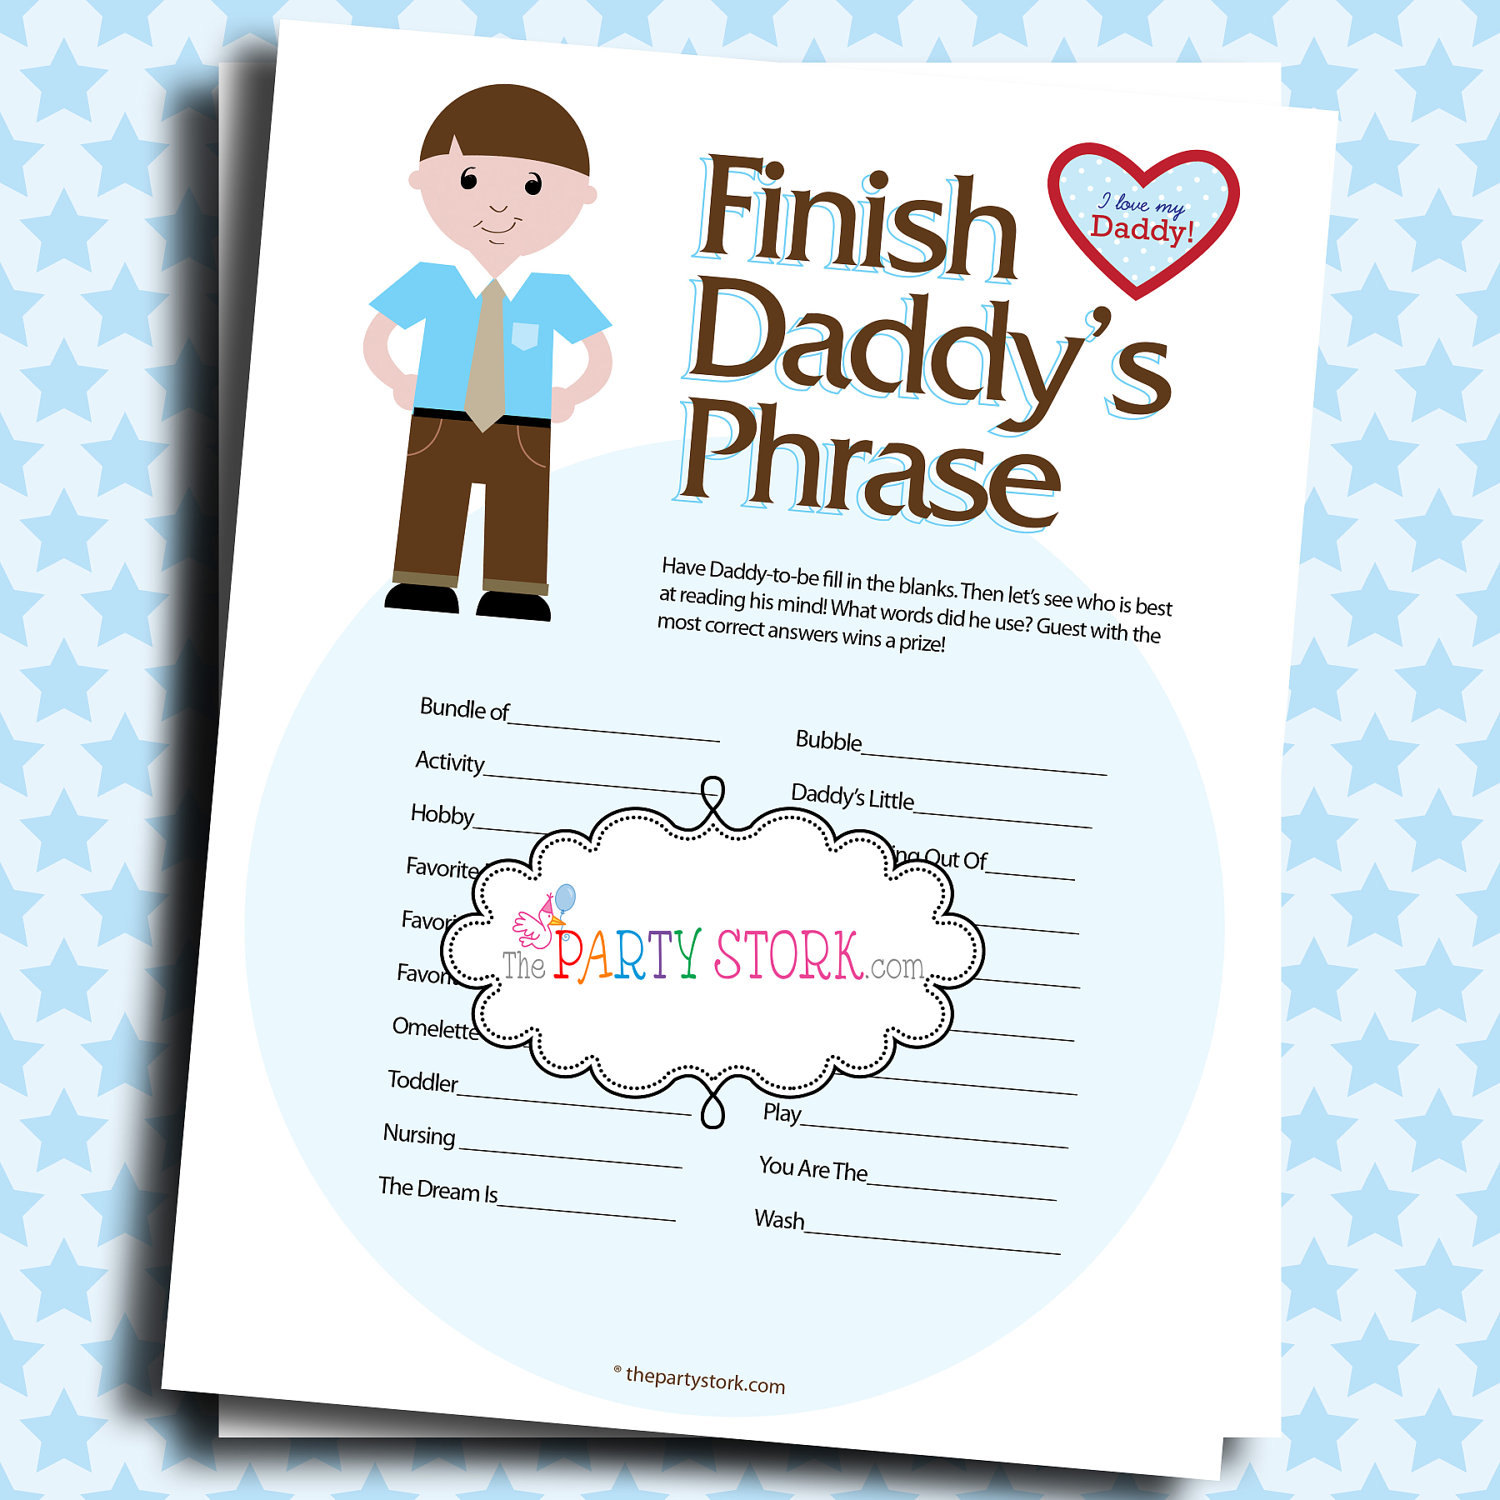 New 952 baby shower games ideas 874 by Baby Shower Phrase Finish Games Daddy